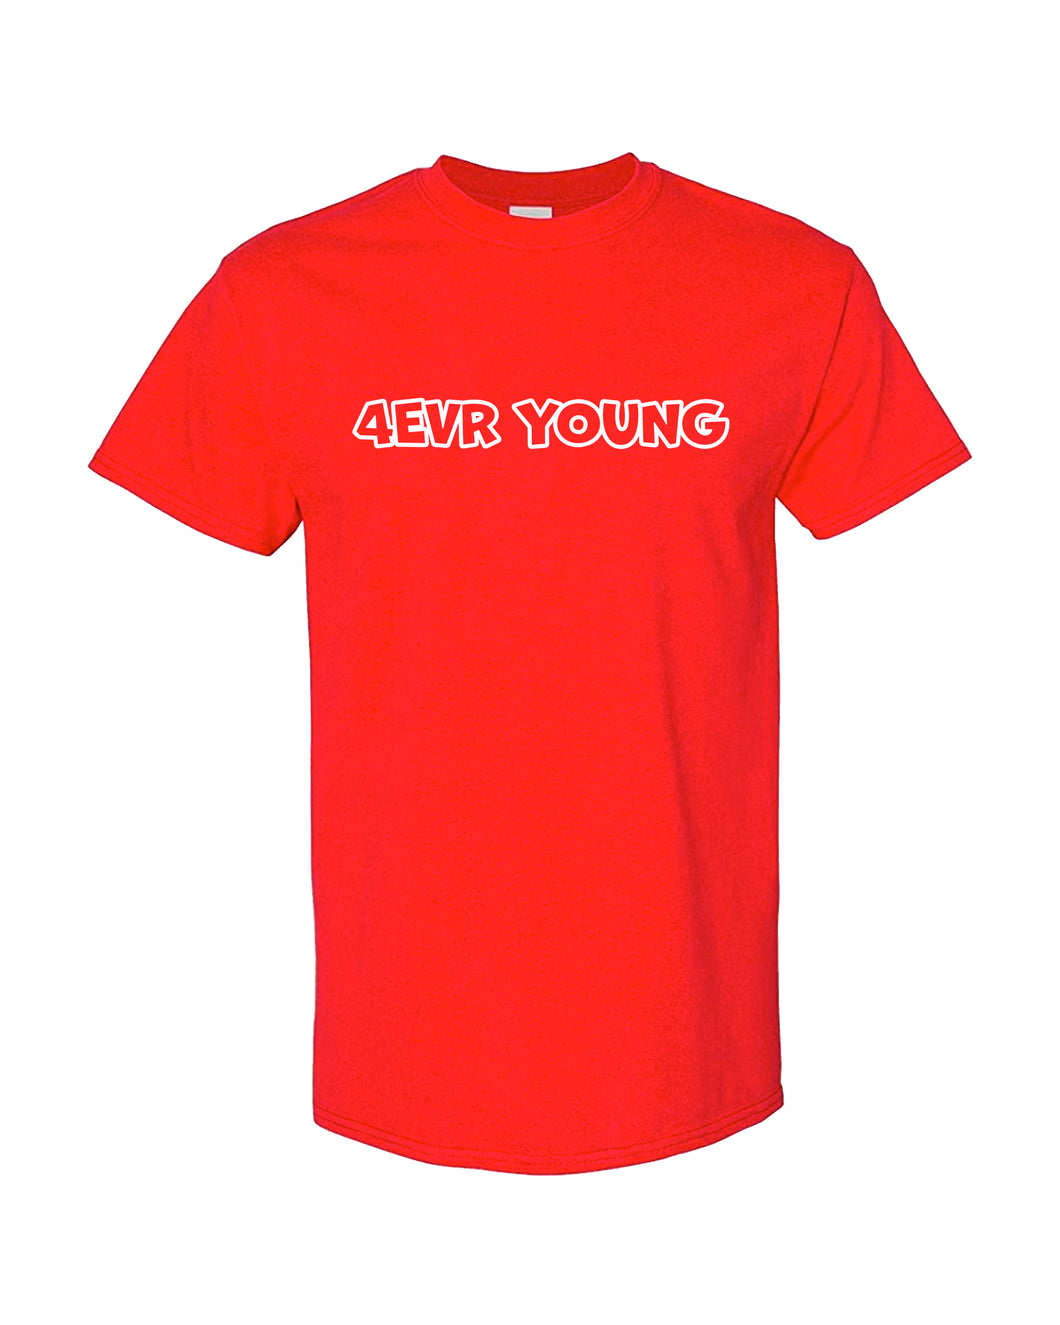 4EVR YOUNG Fun Red Tee